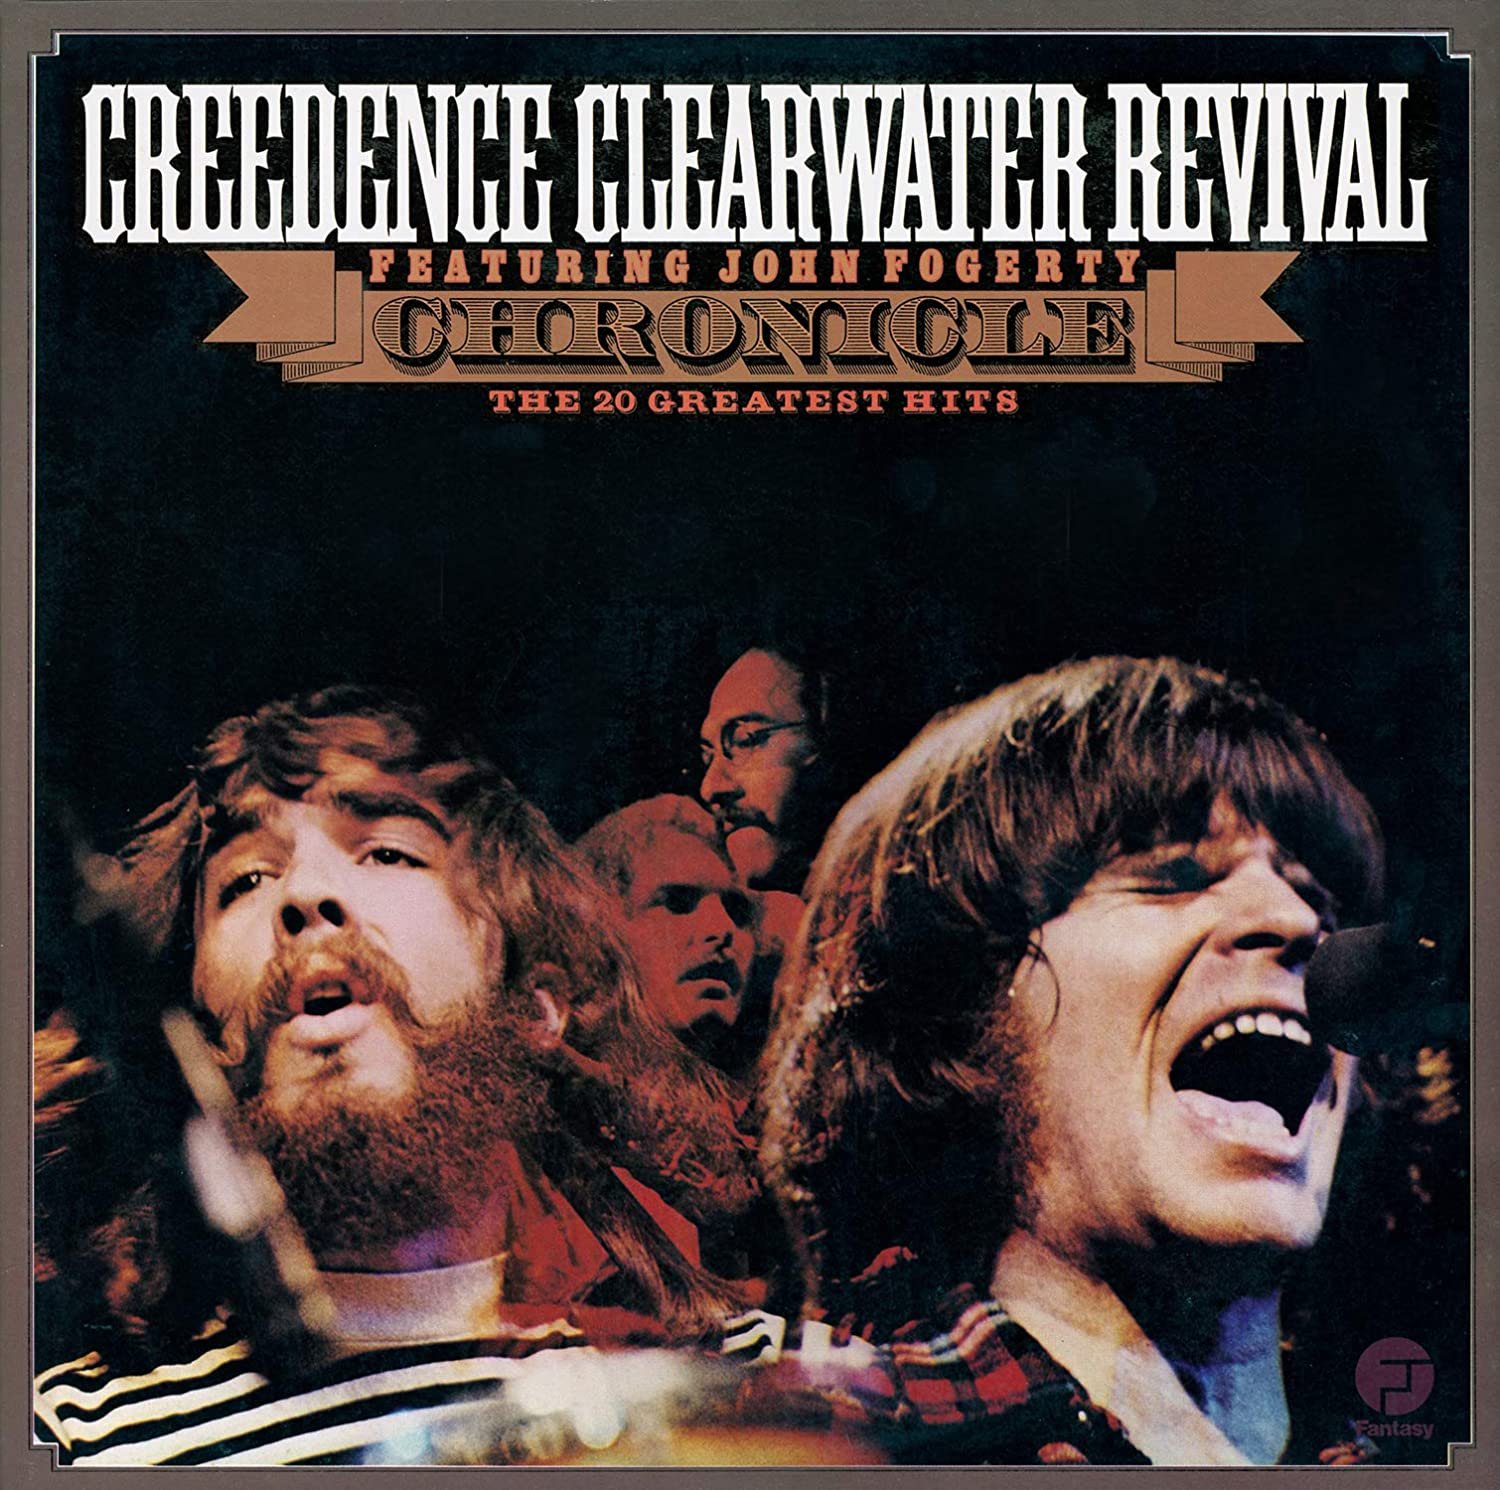 Chronicle, Vol. 1 — Creedence Clearwater Revival 